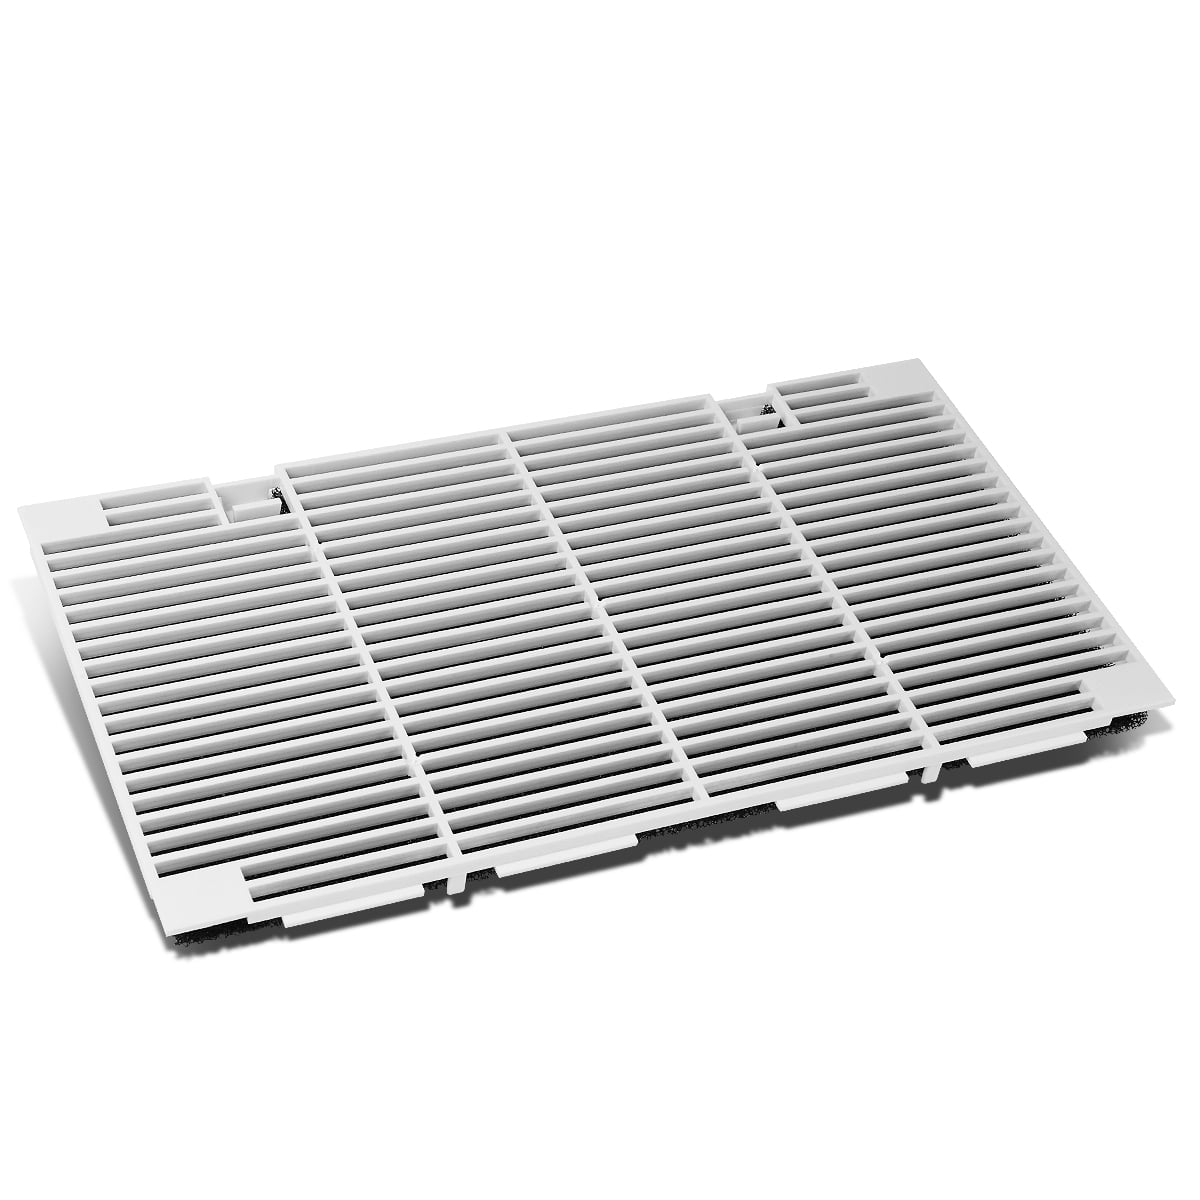 For Dometic 3104928.019 RV Ducted Air Grille Vent Screen Filter Trailer